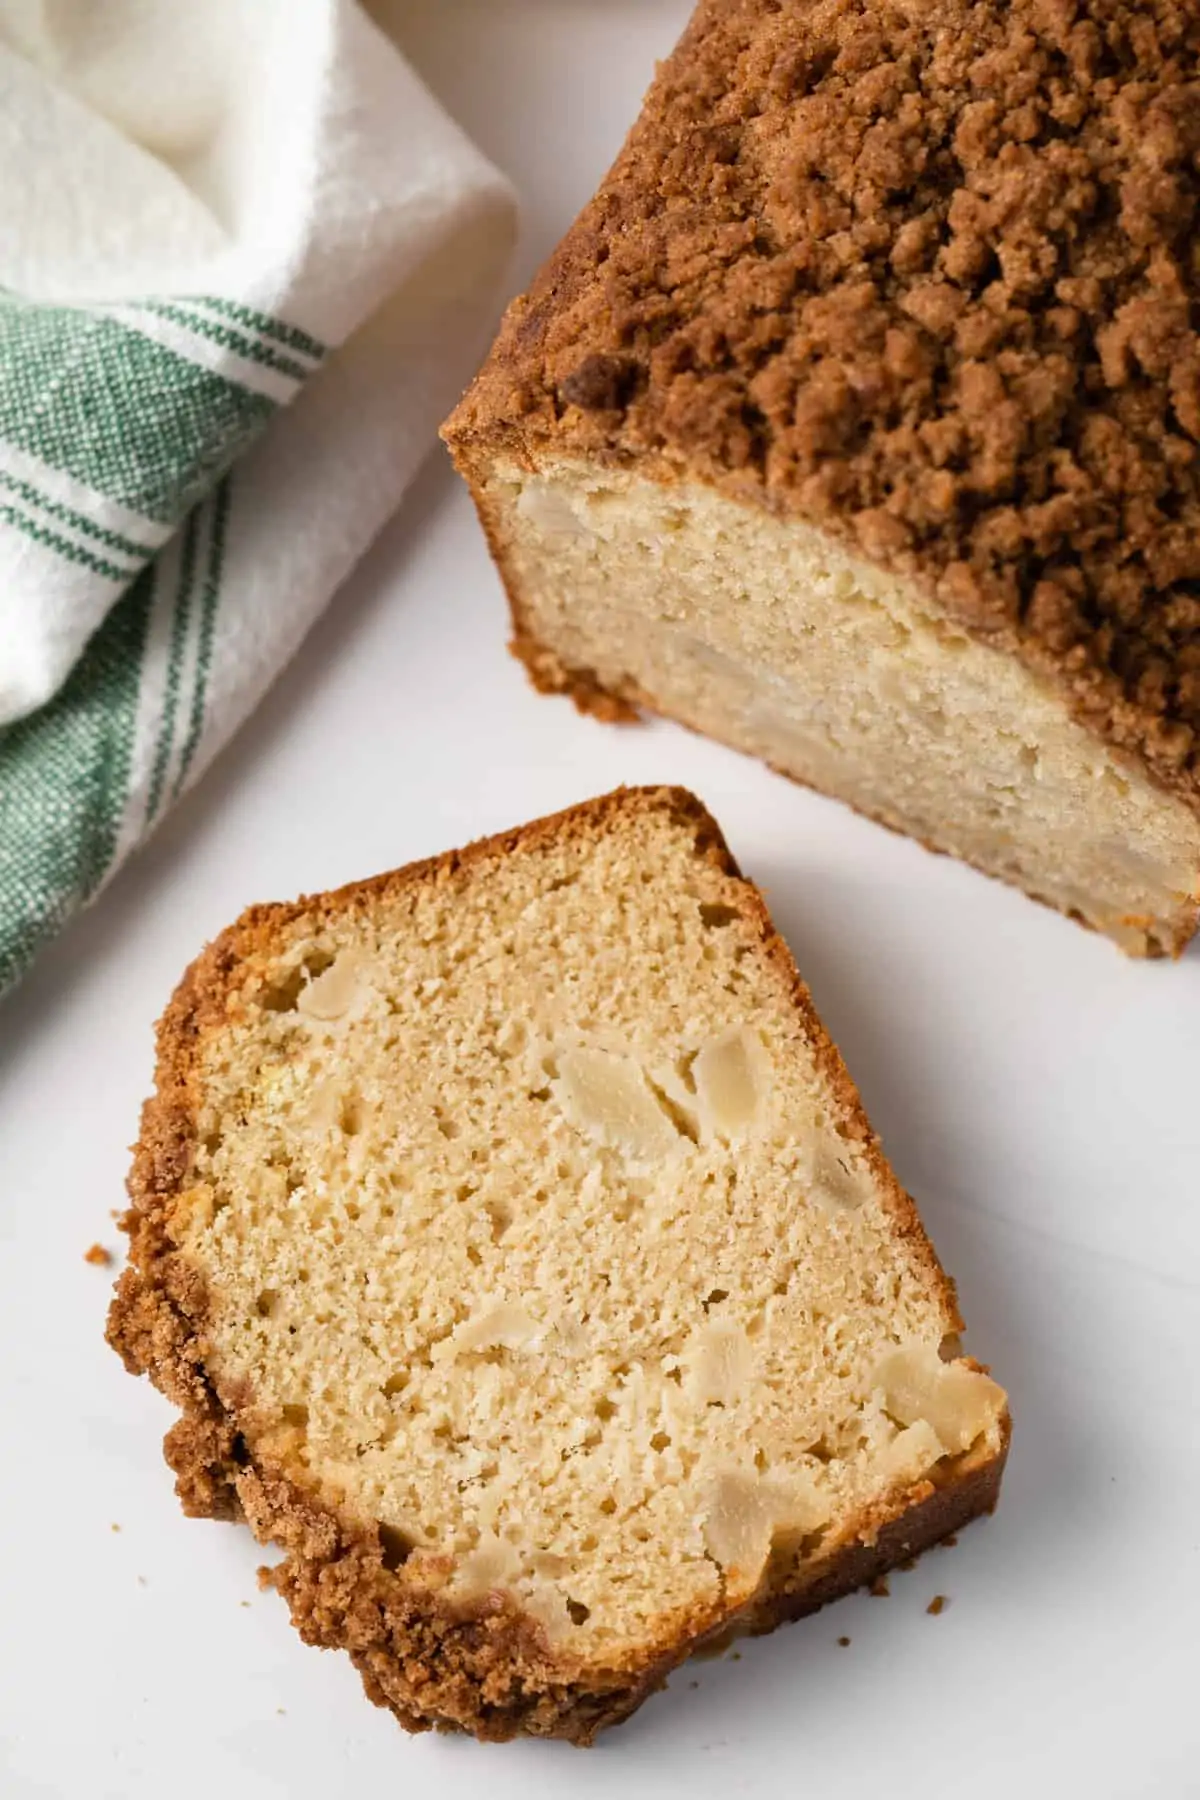 Overhead view of a slice of pear bread